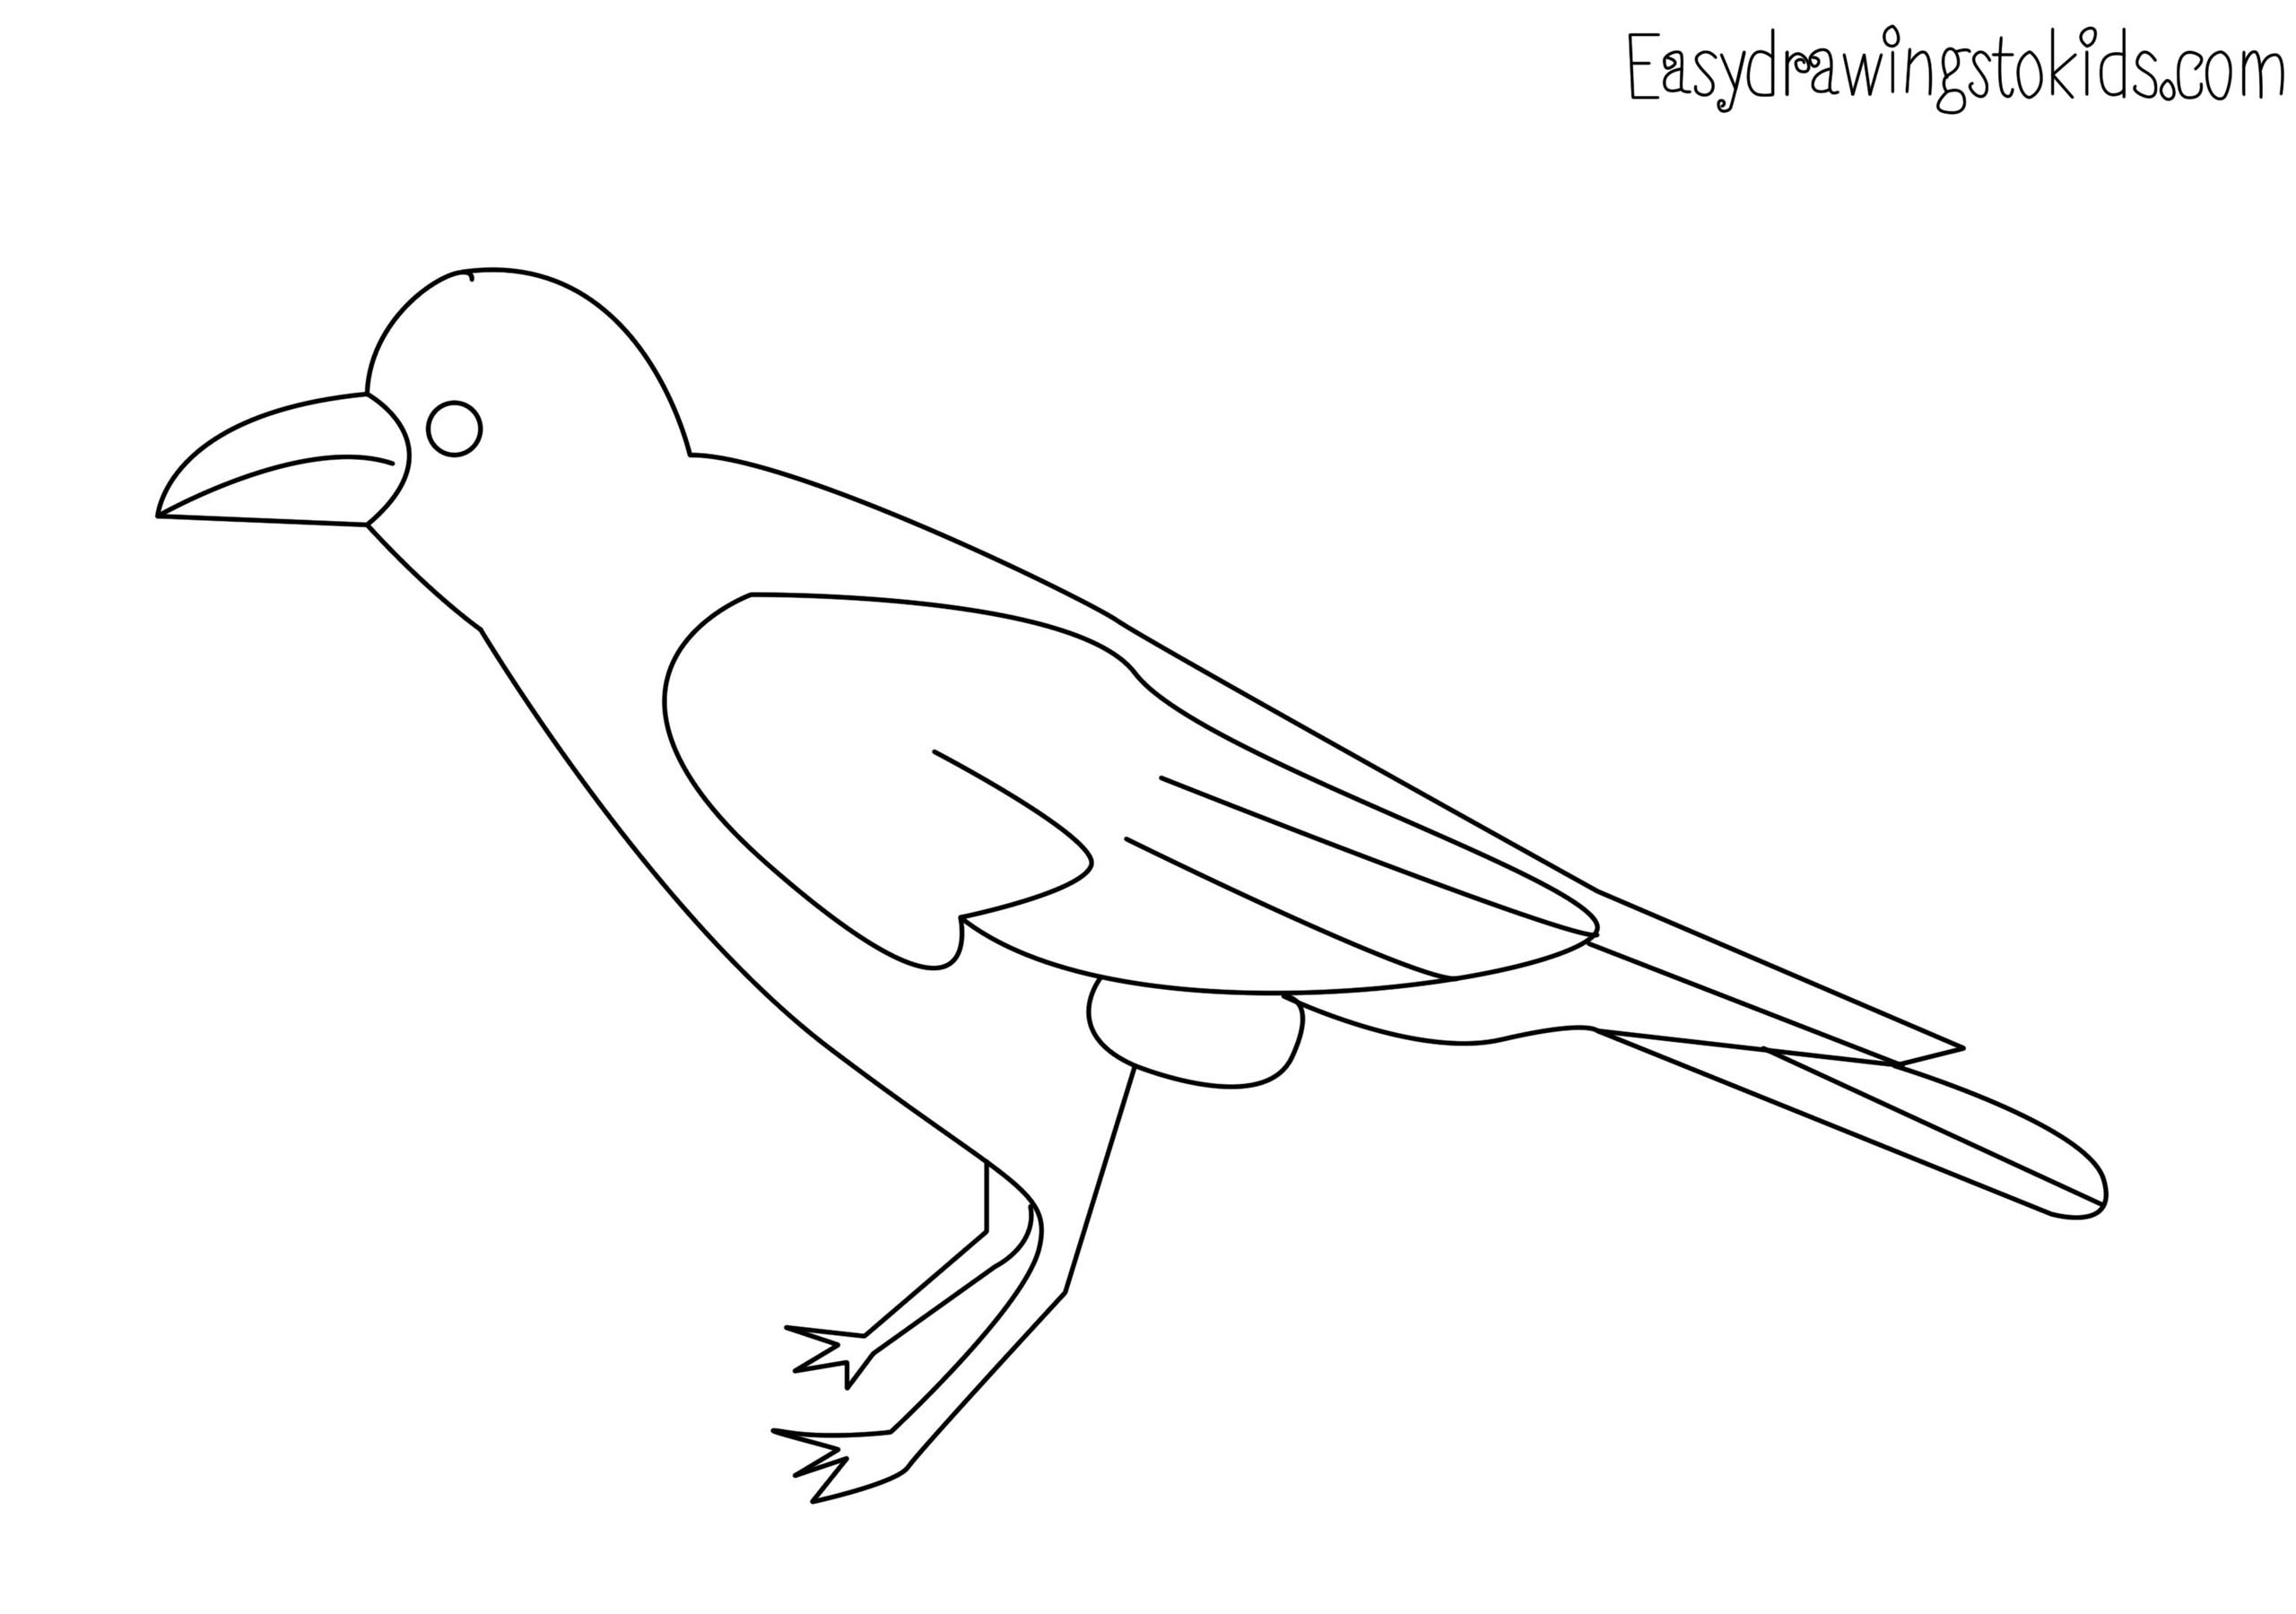 Crow coloring page - Easydrawingstokids